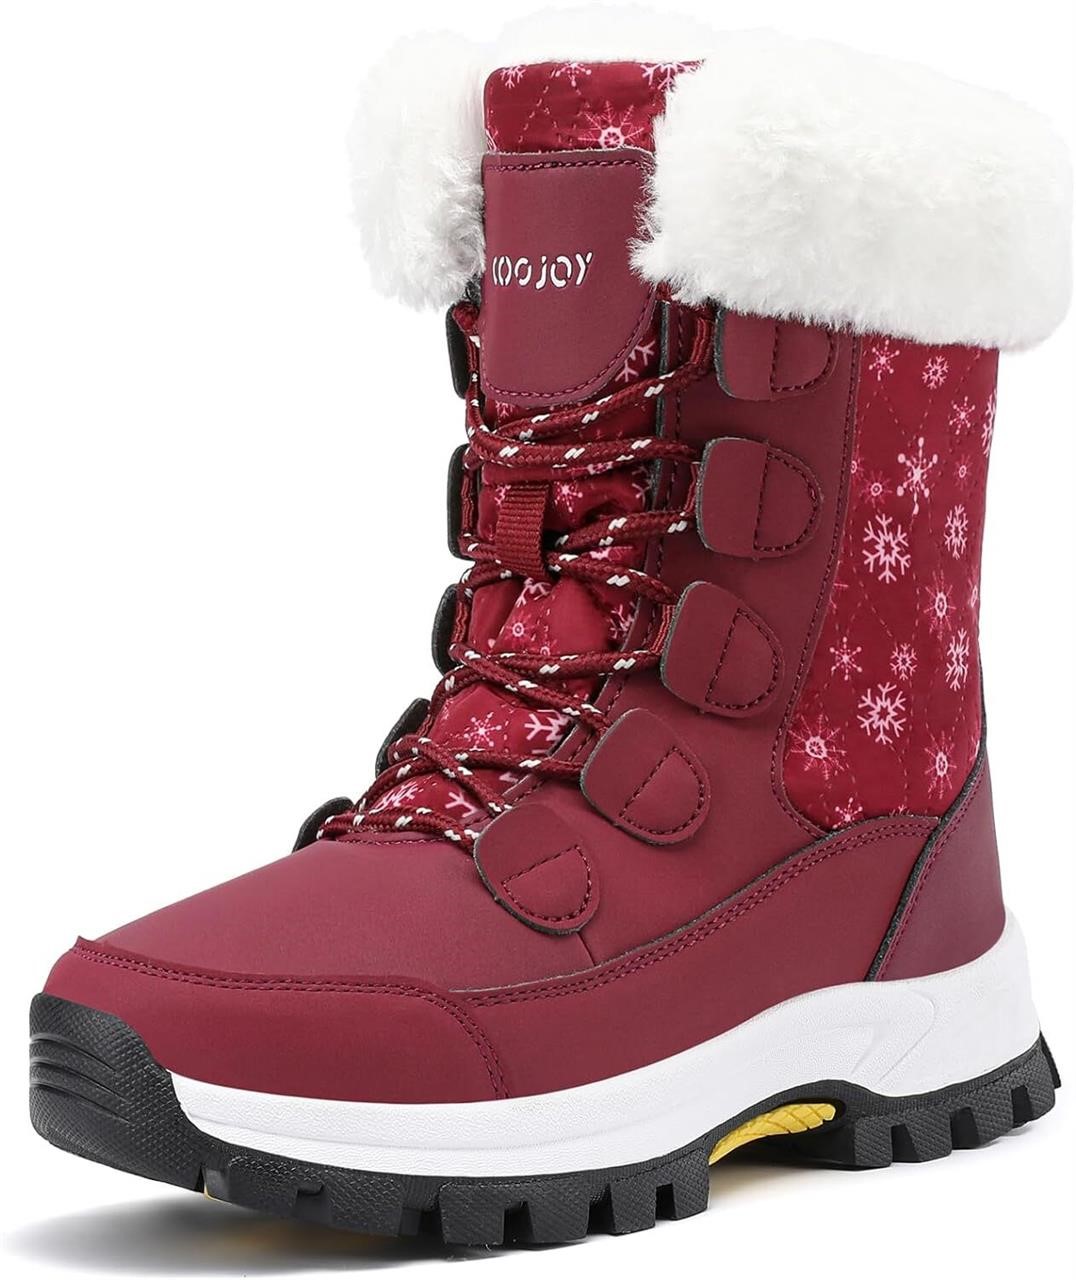 size 8 - COOJOY Womens Snow Boots  Wine Red